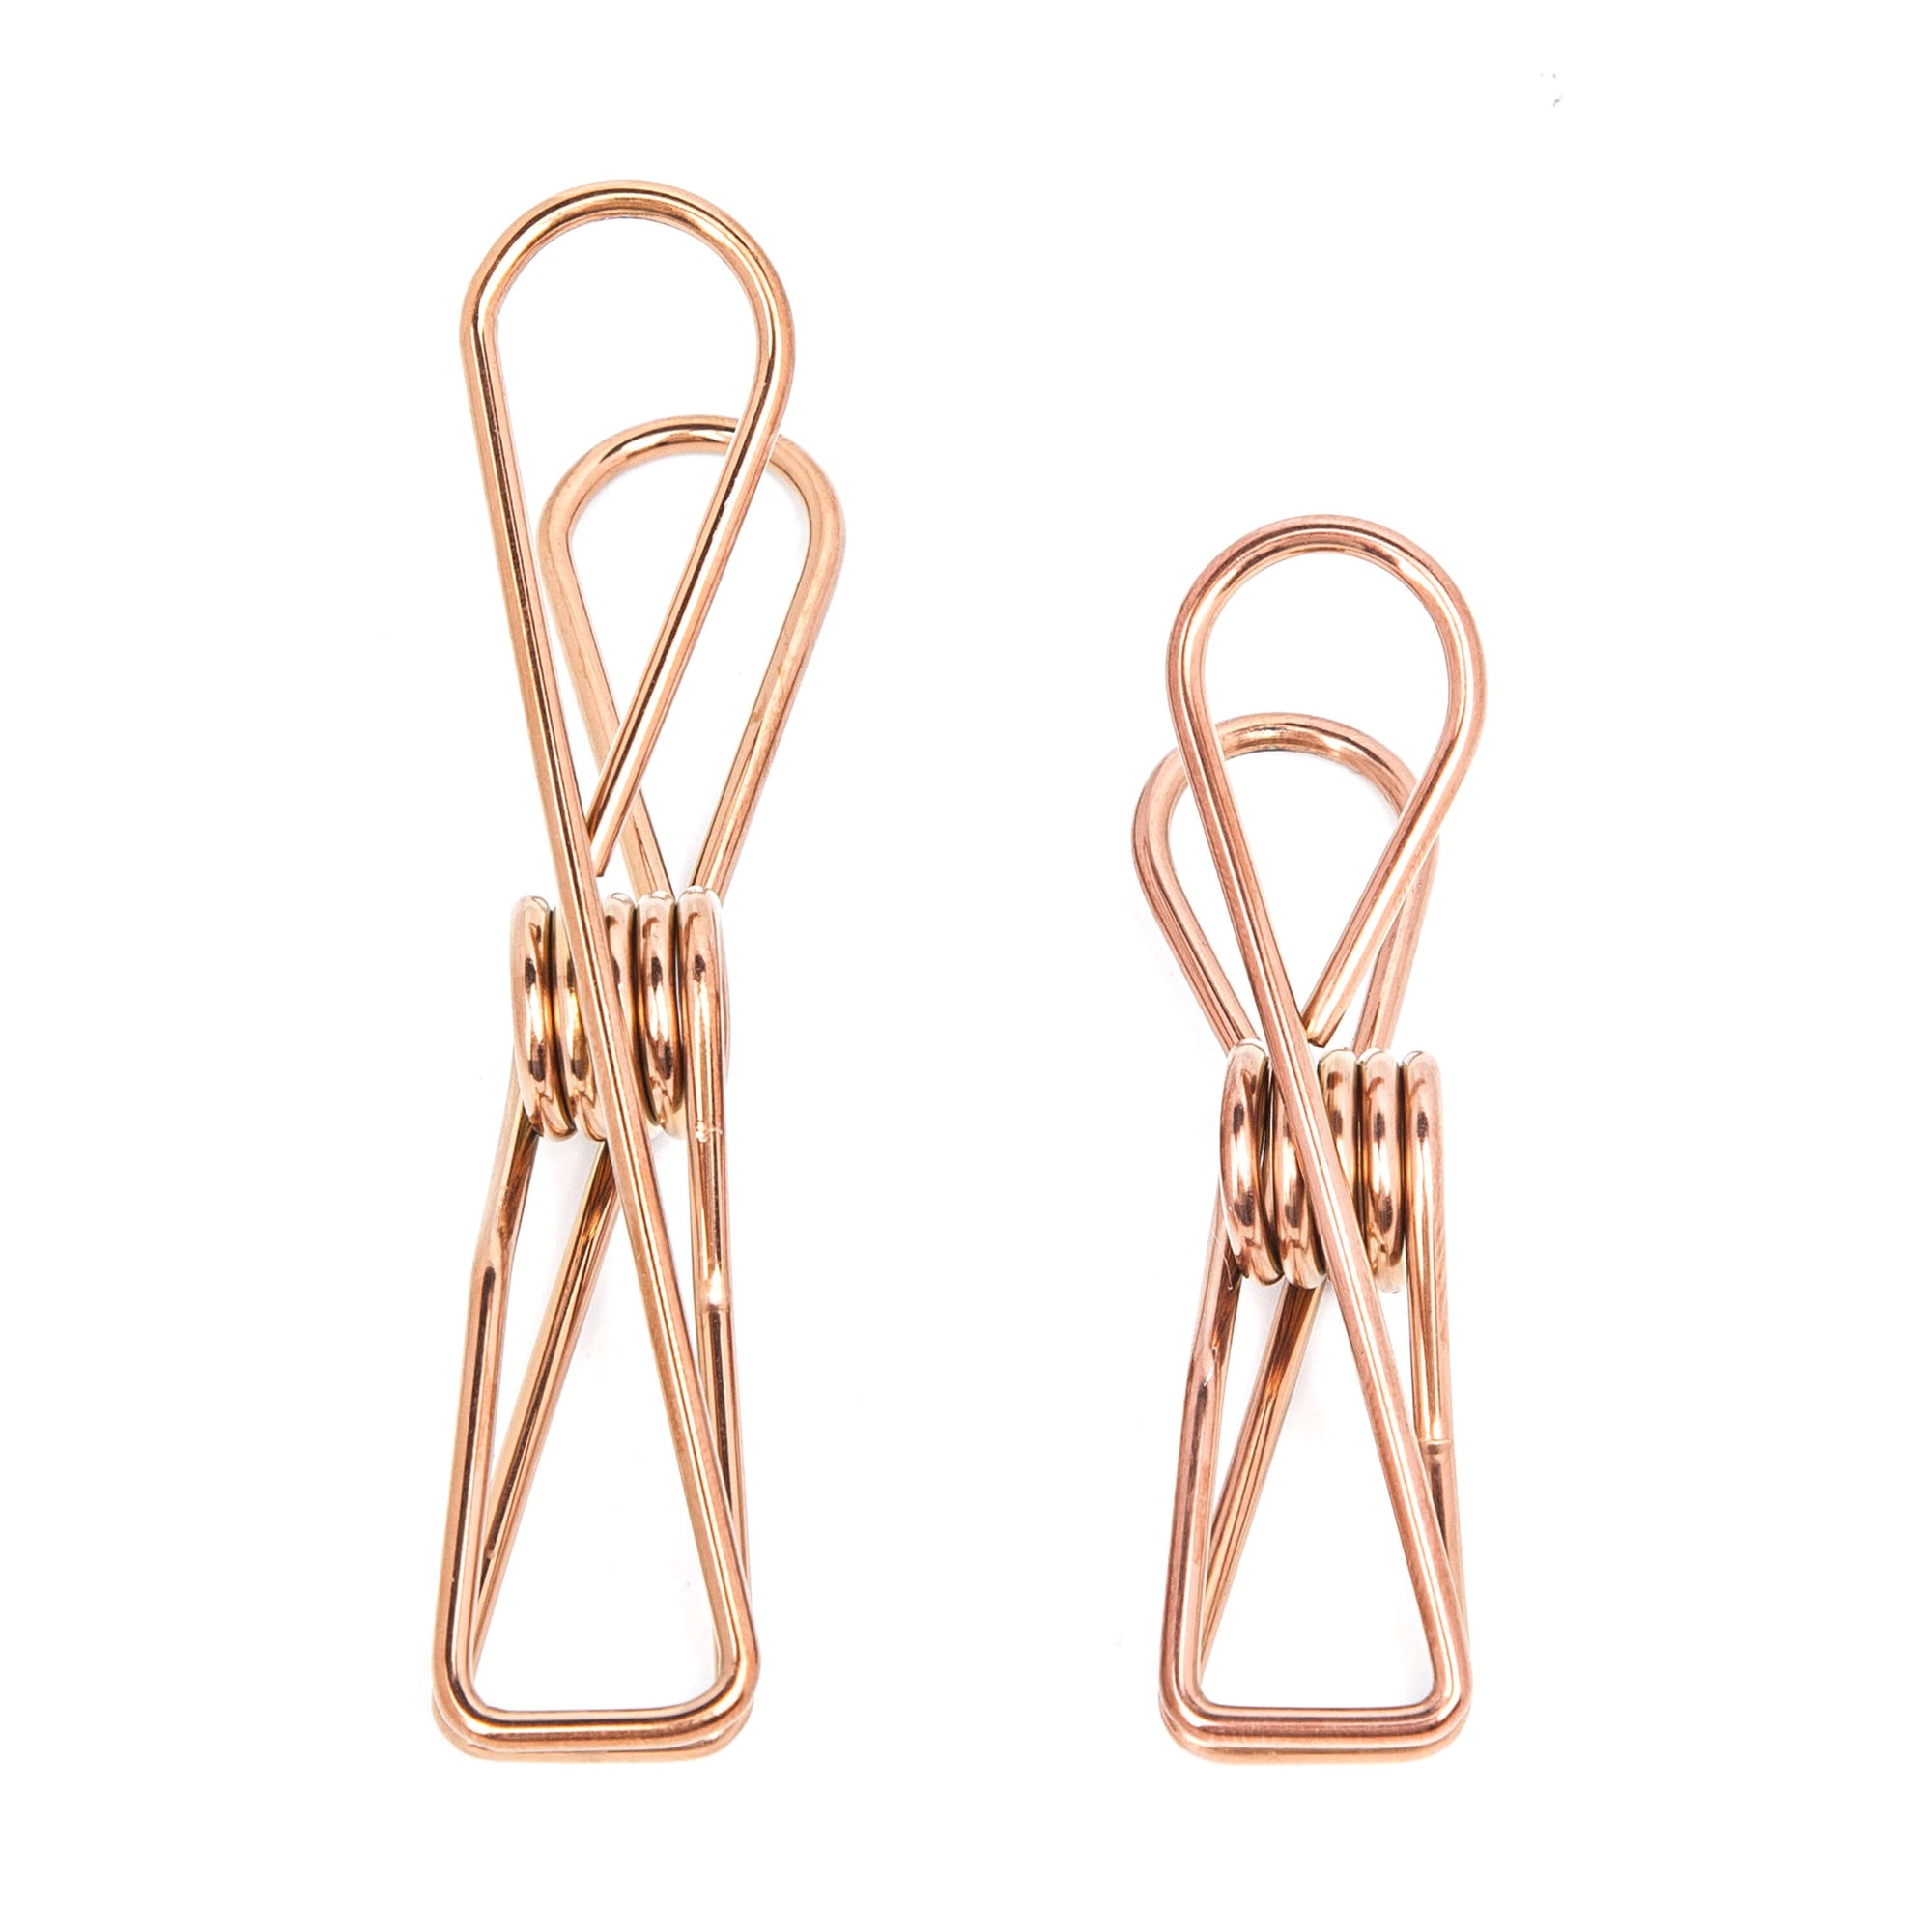 Rose Gold Stainless Clothing Pegs 40 Standard & 10 Large Pegs - EcoLuxe Living